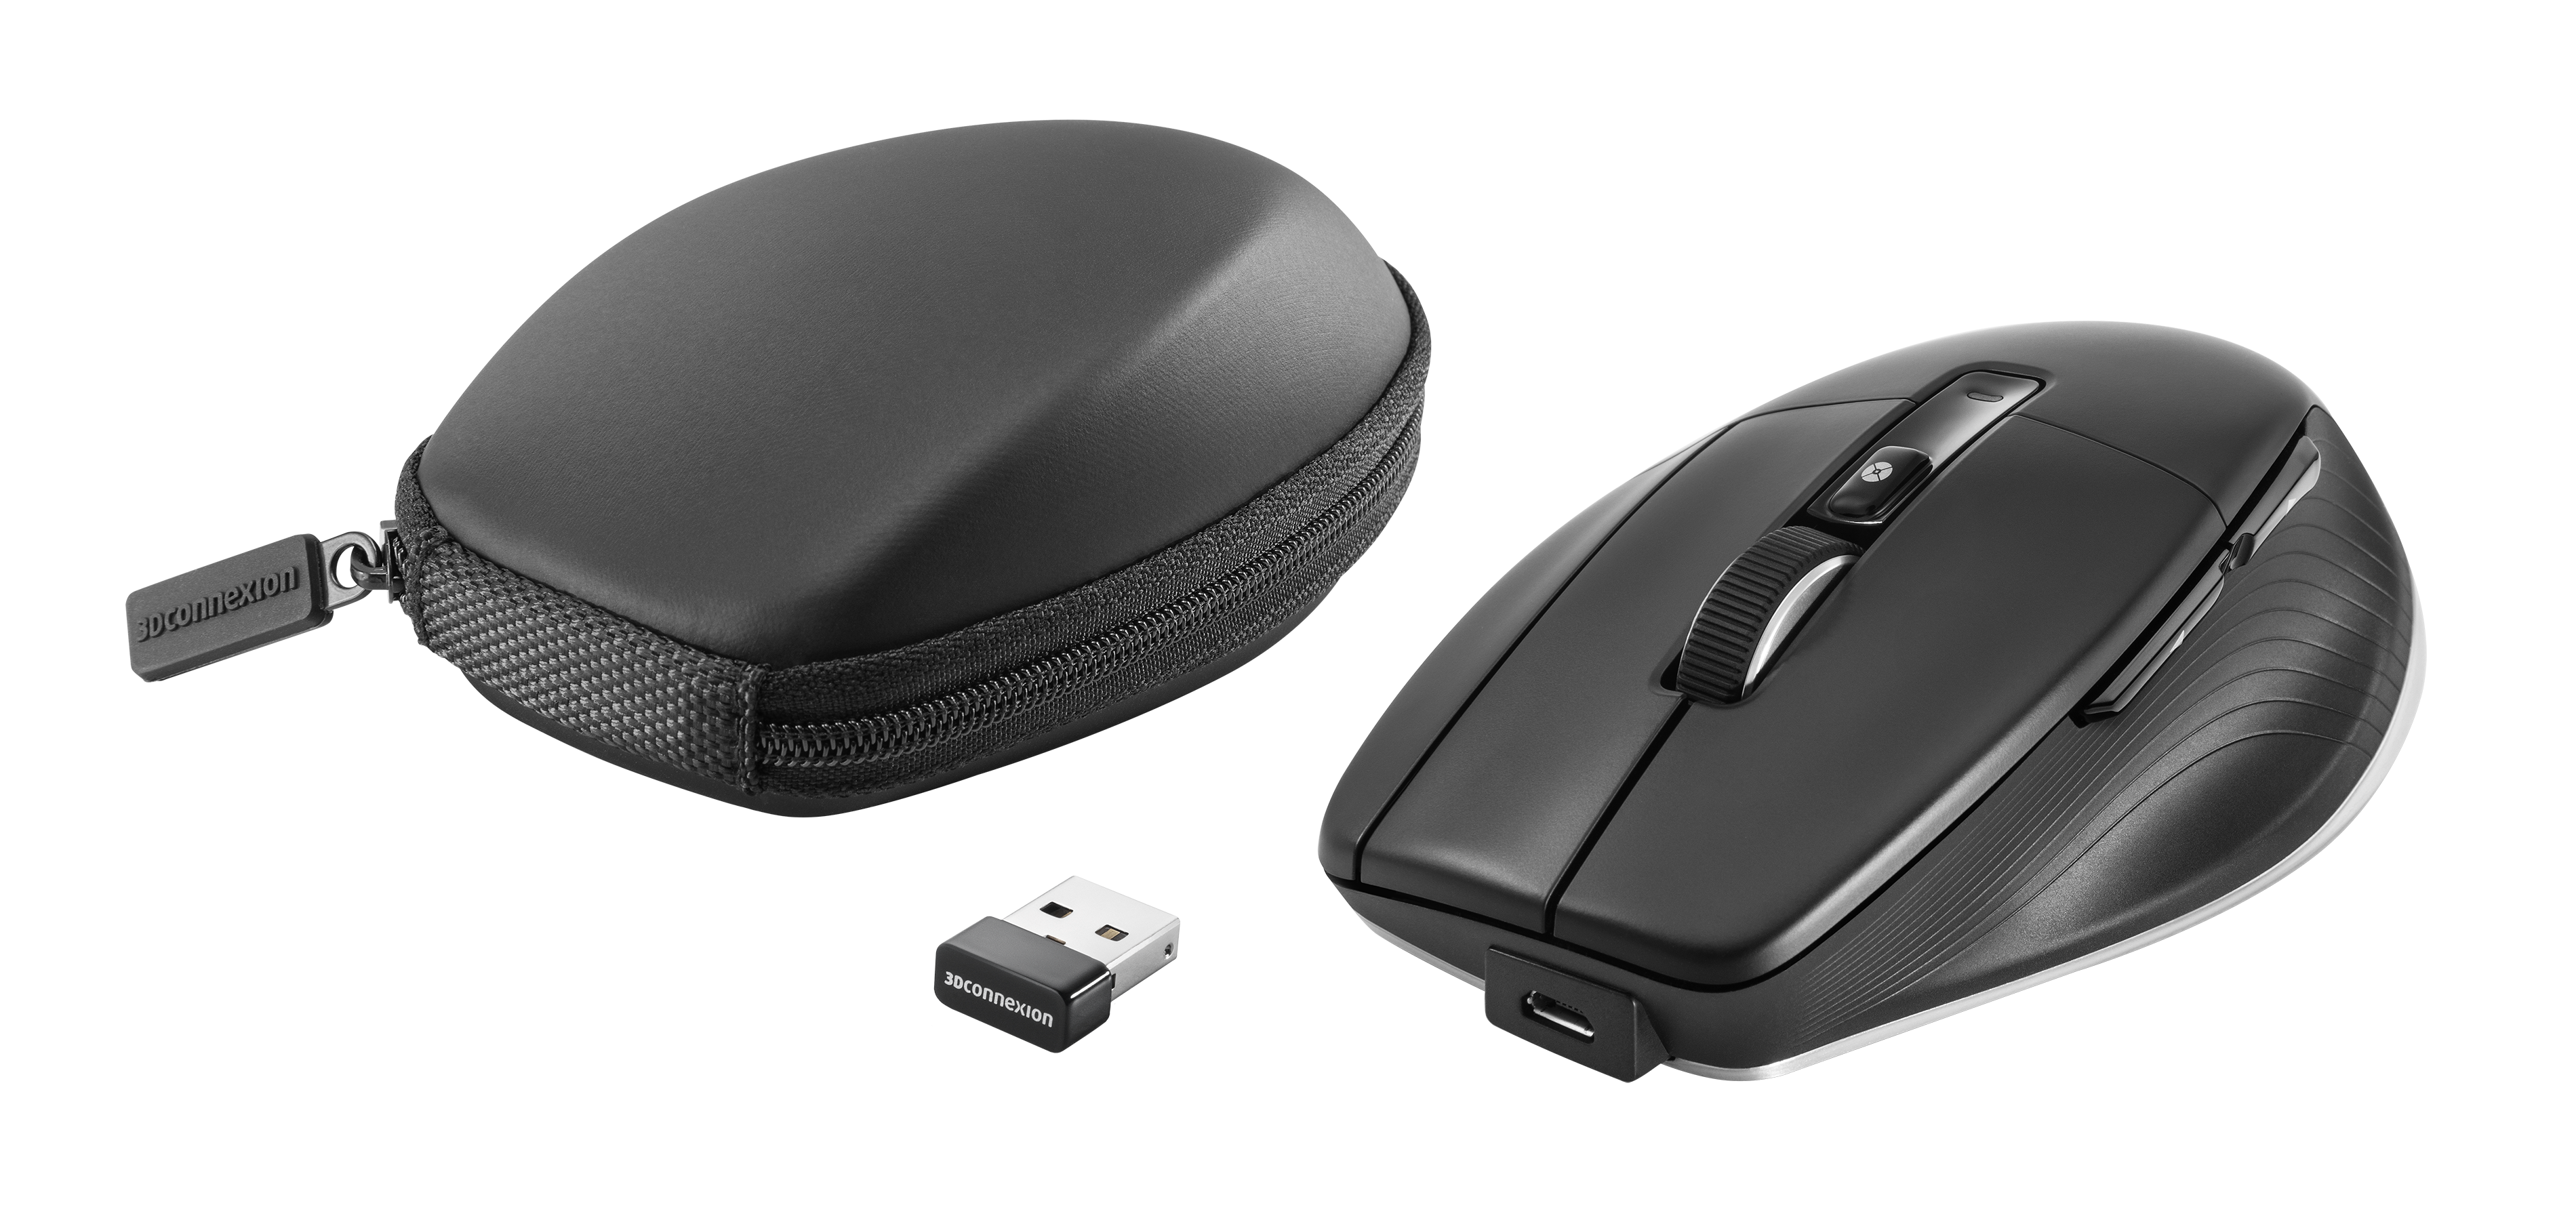 3Dconnexion upgrades with CadMouse Wireless Pro - DEVELOP3D